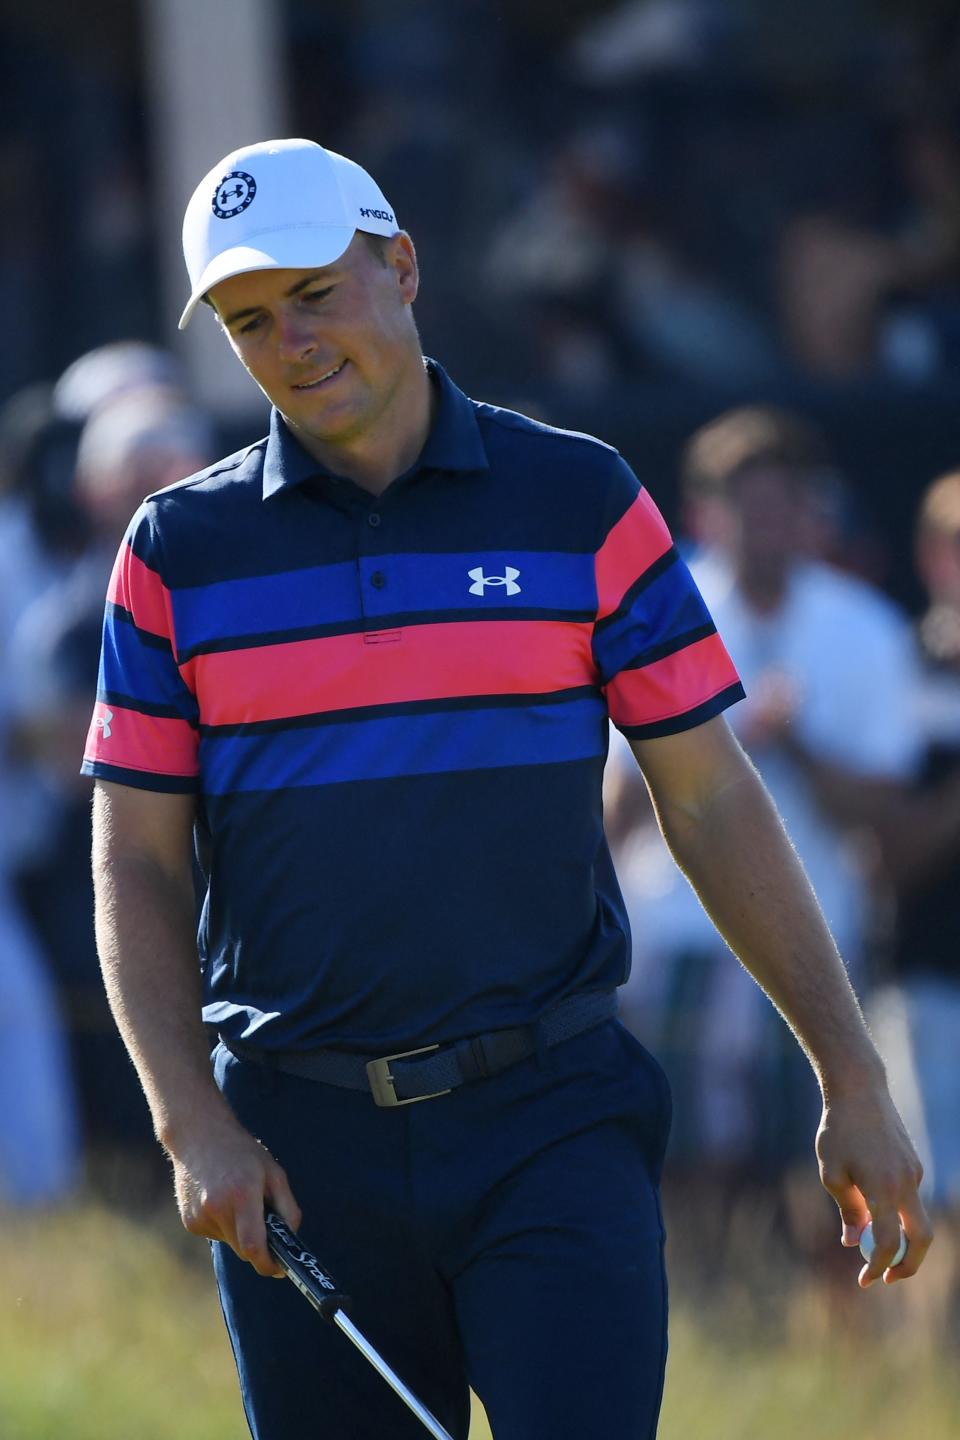 Jordan Spieth (pictured) reacts after a put on the 16th green during his final round on day 4 of The 149th British Open Golf Championship at Royal St George's.